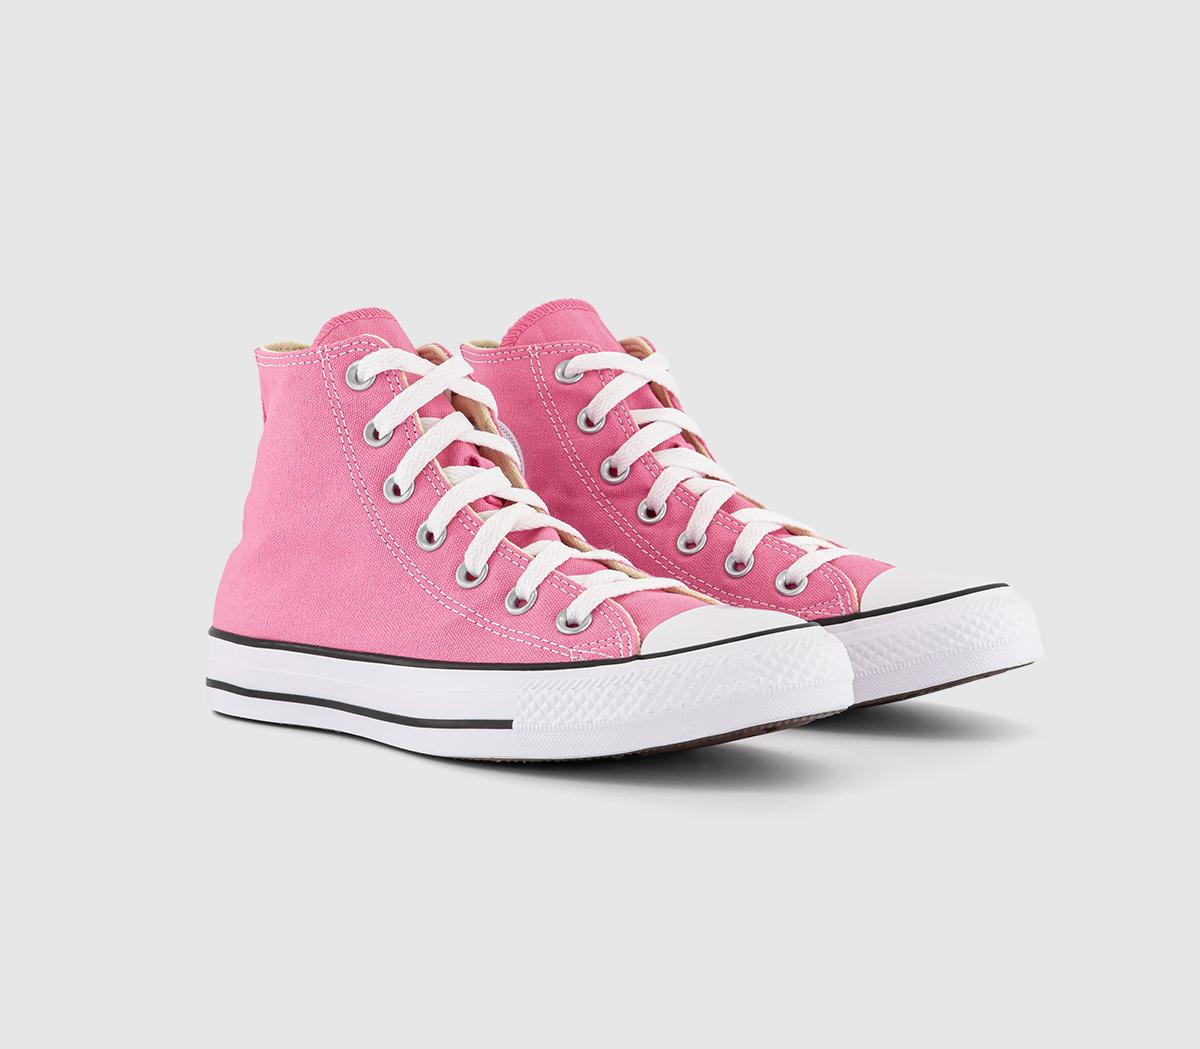 Converse Ladies Iconic All Star Hi Pink Canvas High Top Trainers, Size: 8